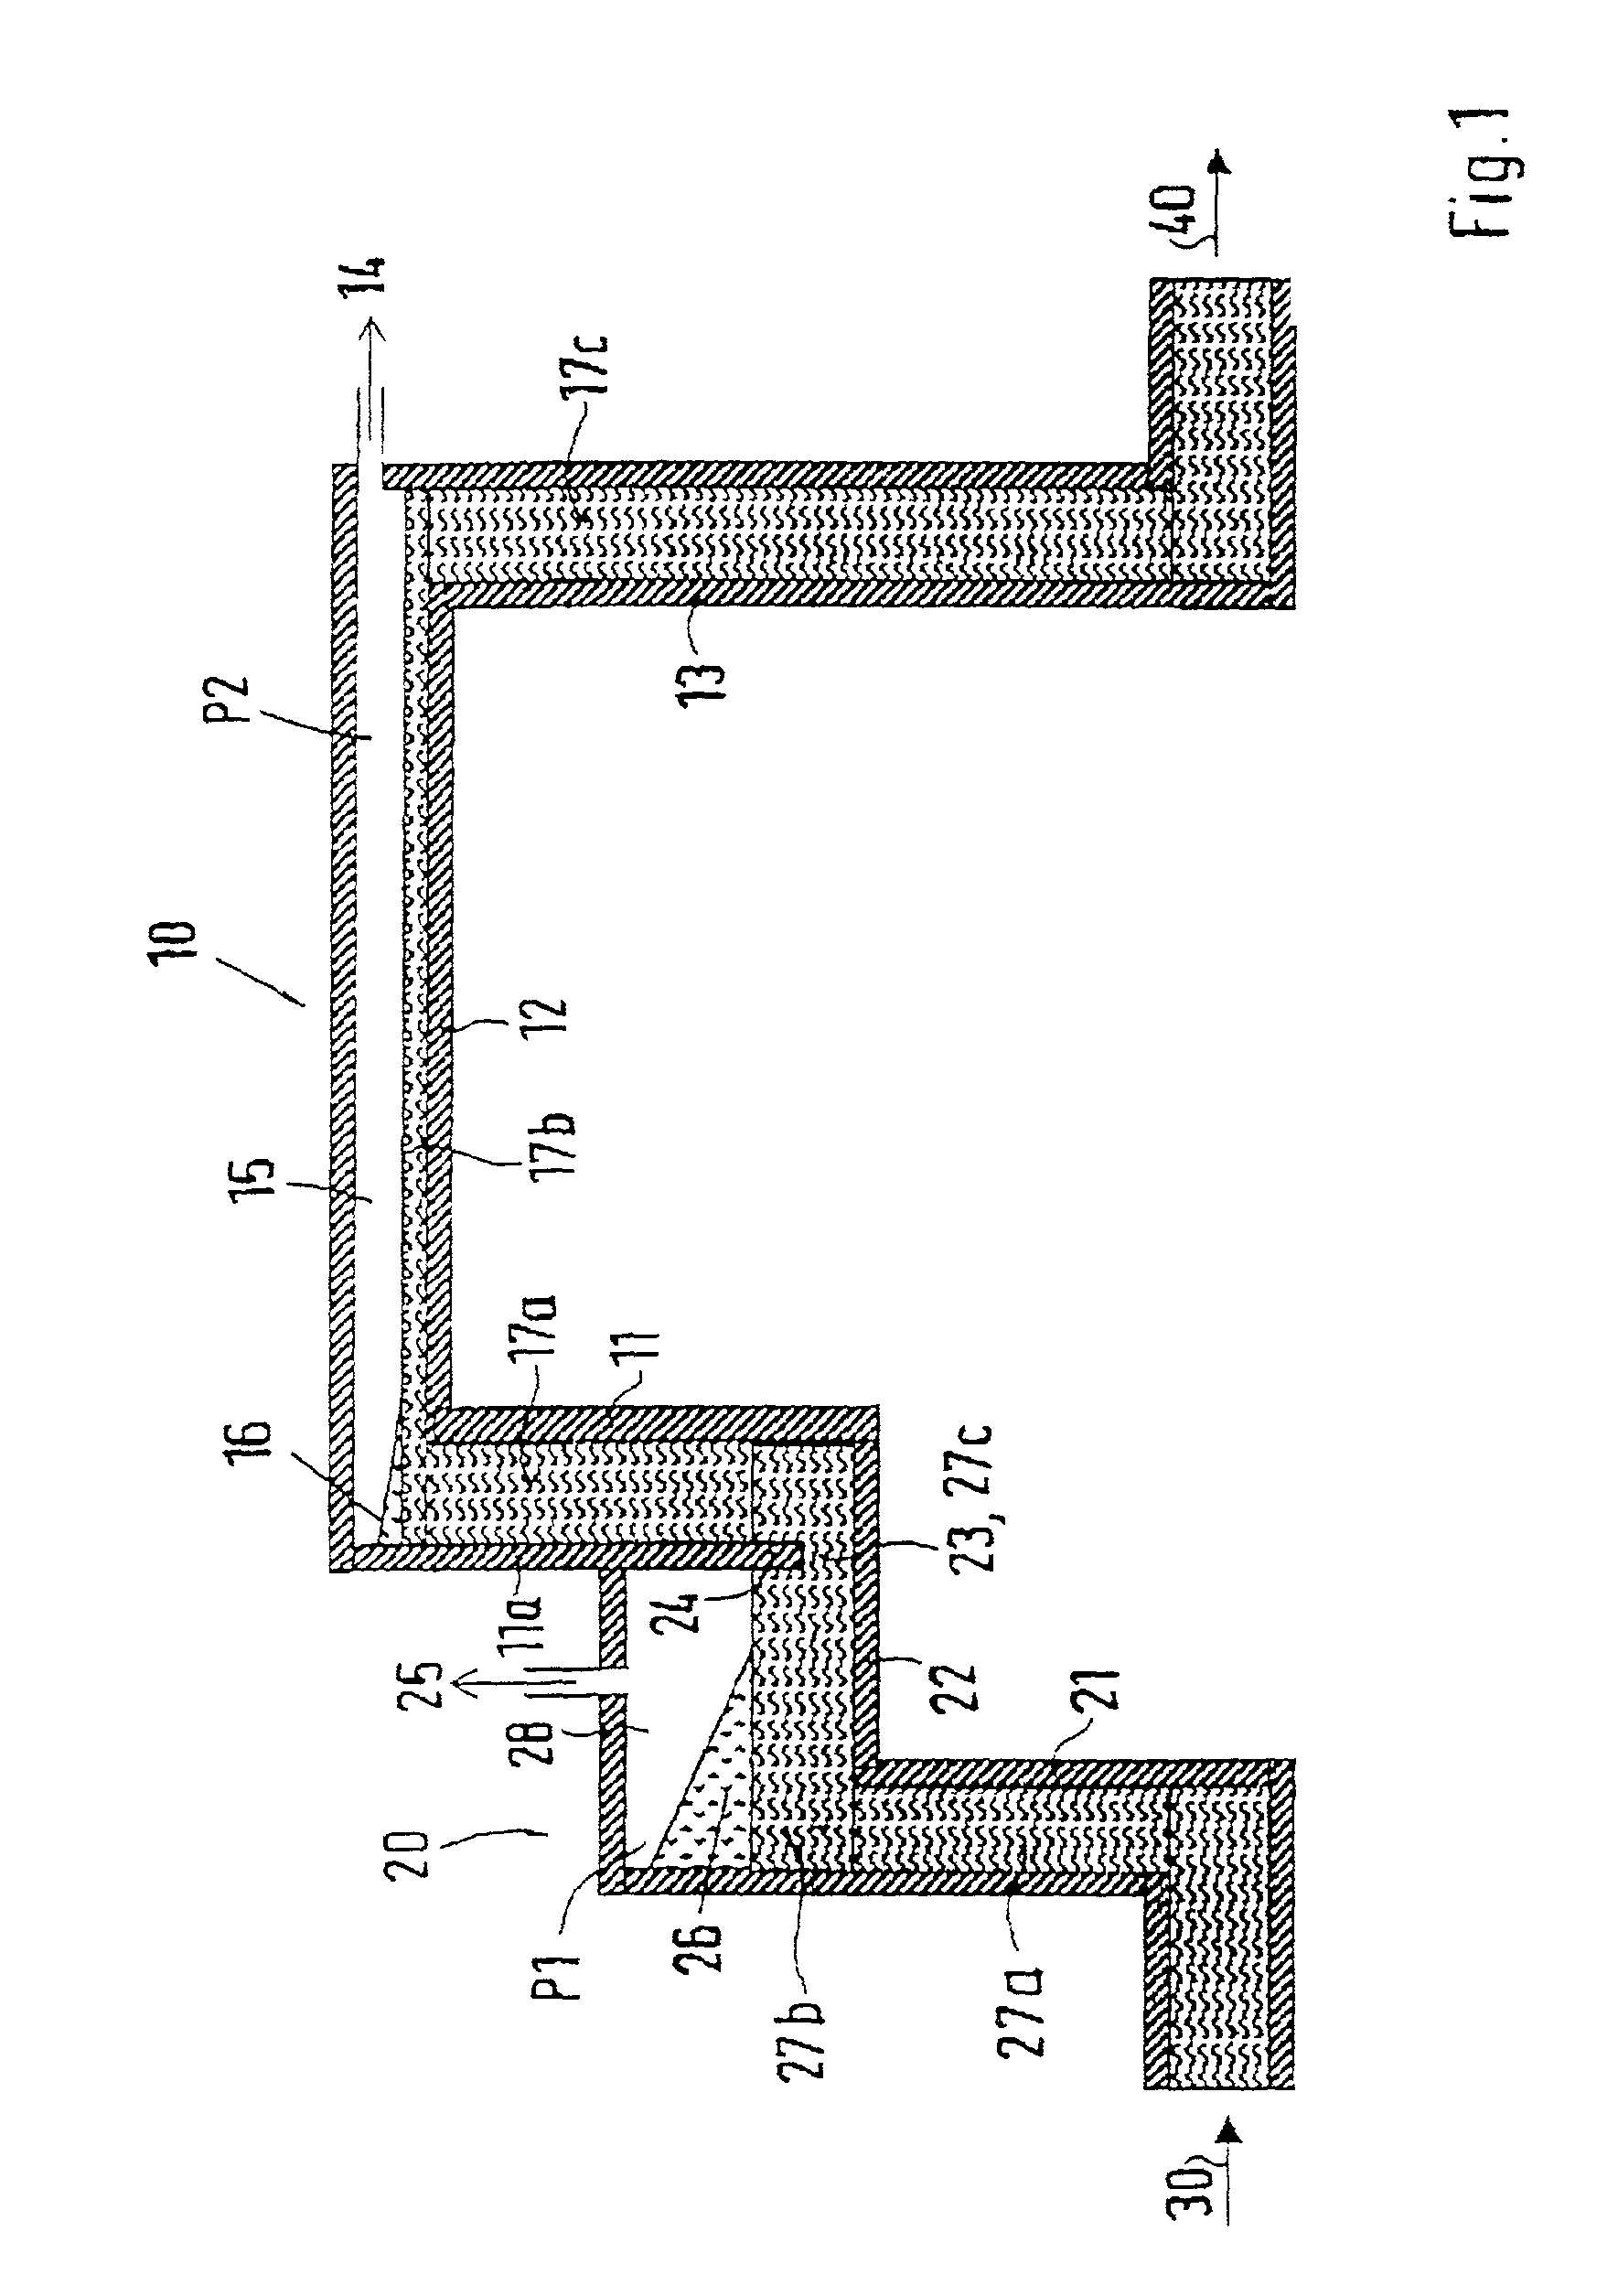 Method and device for refining a glass melting